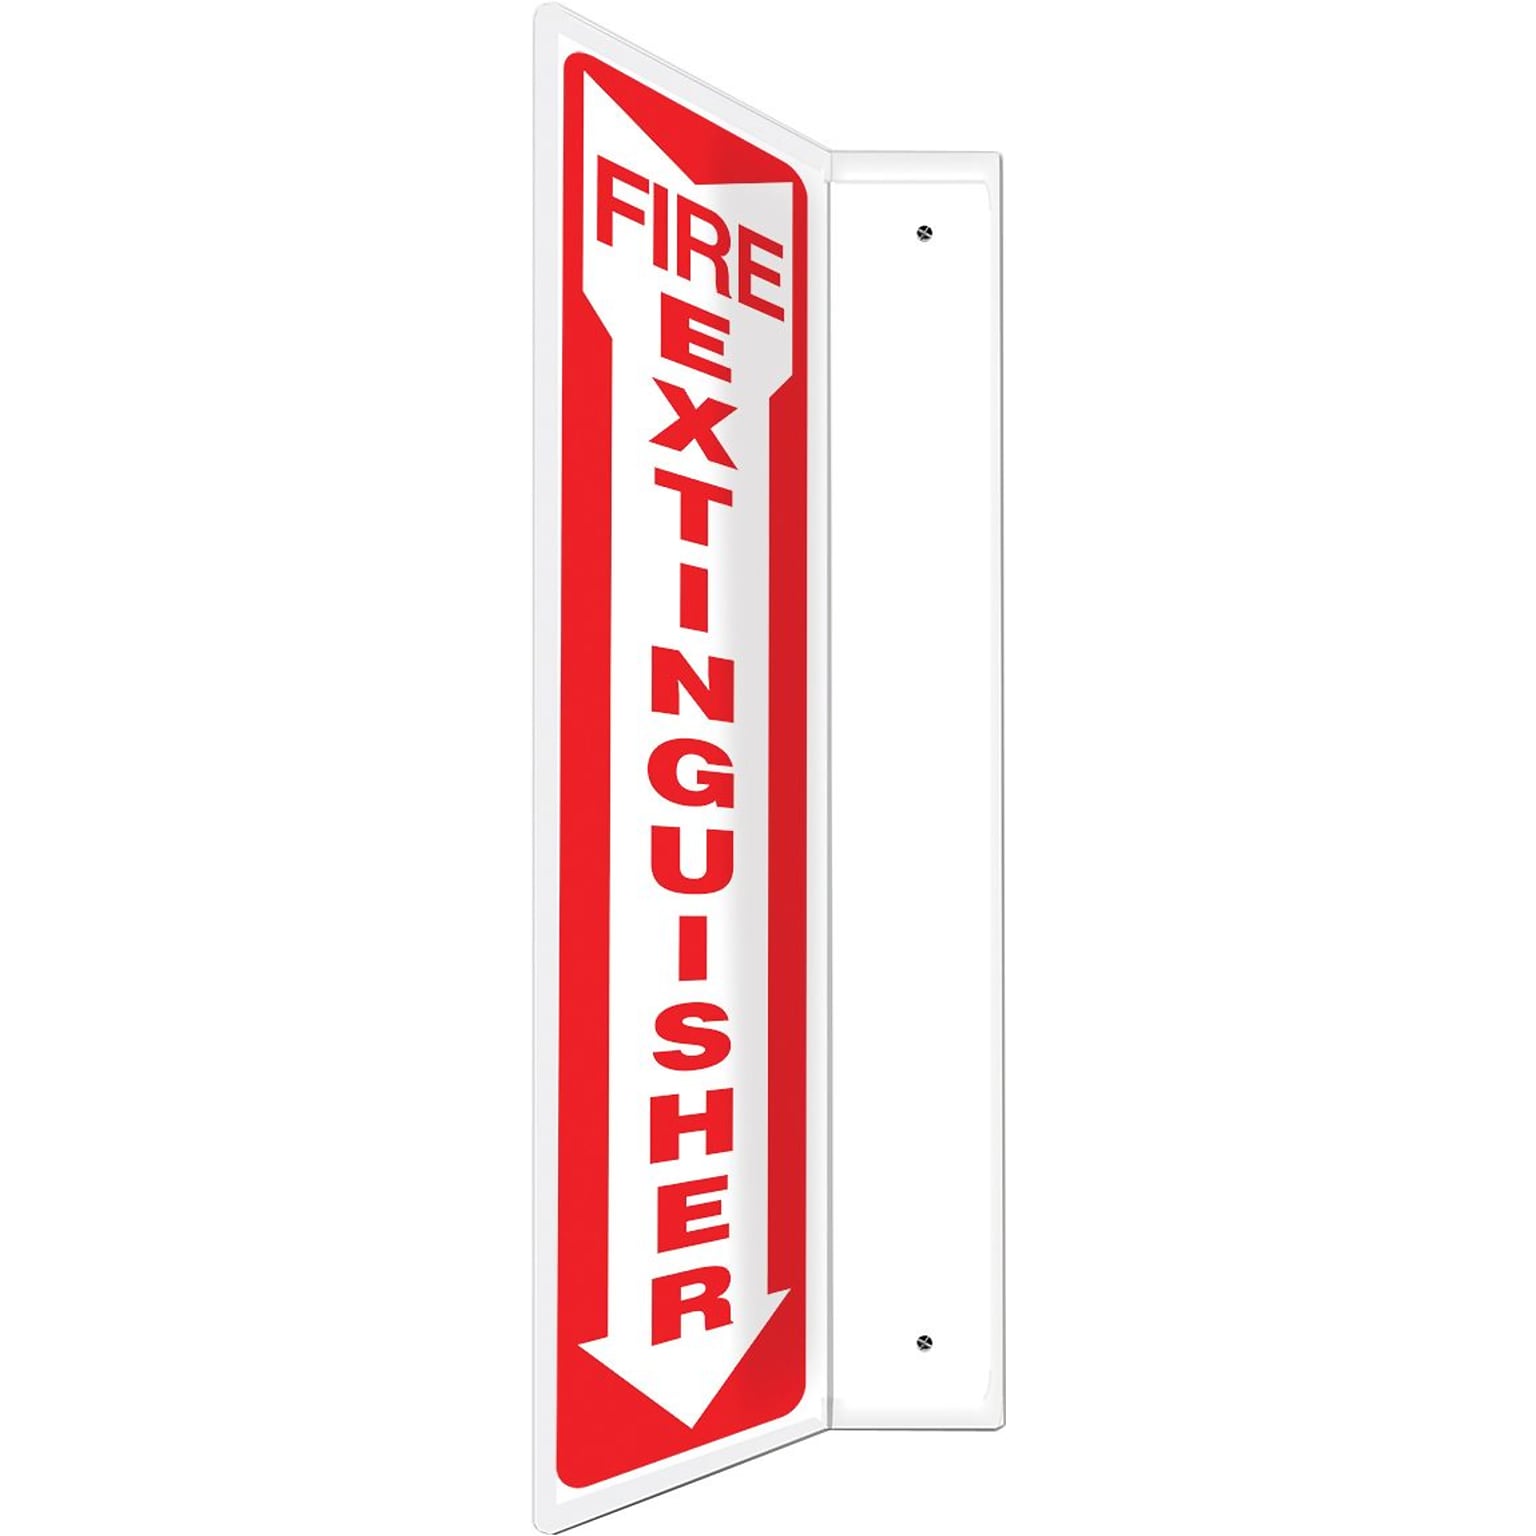 Accuform Signs® Fire Extinguisher Projection Sign, Red/White, 18H x 4W, 1/Pack (PSP426)